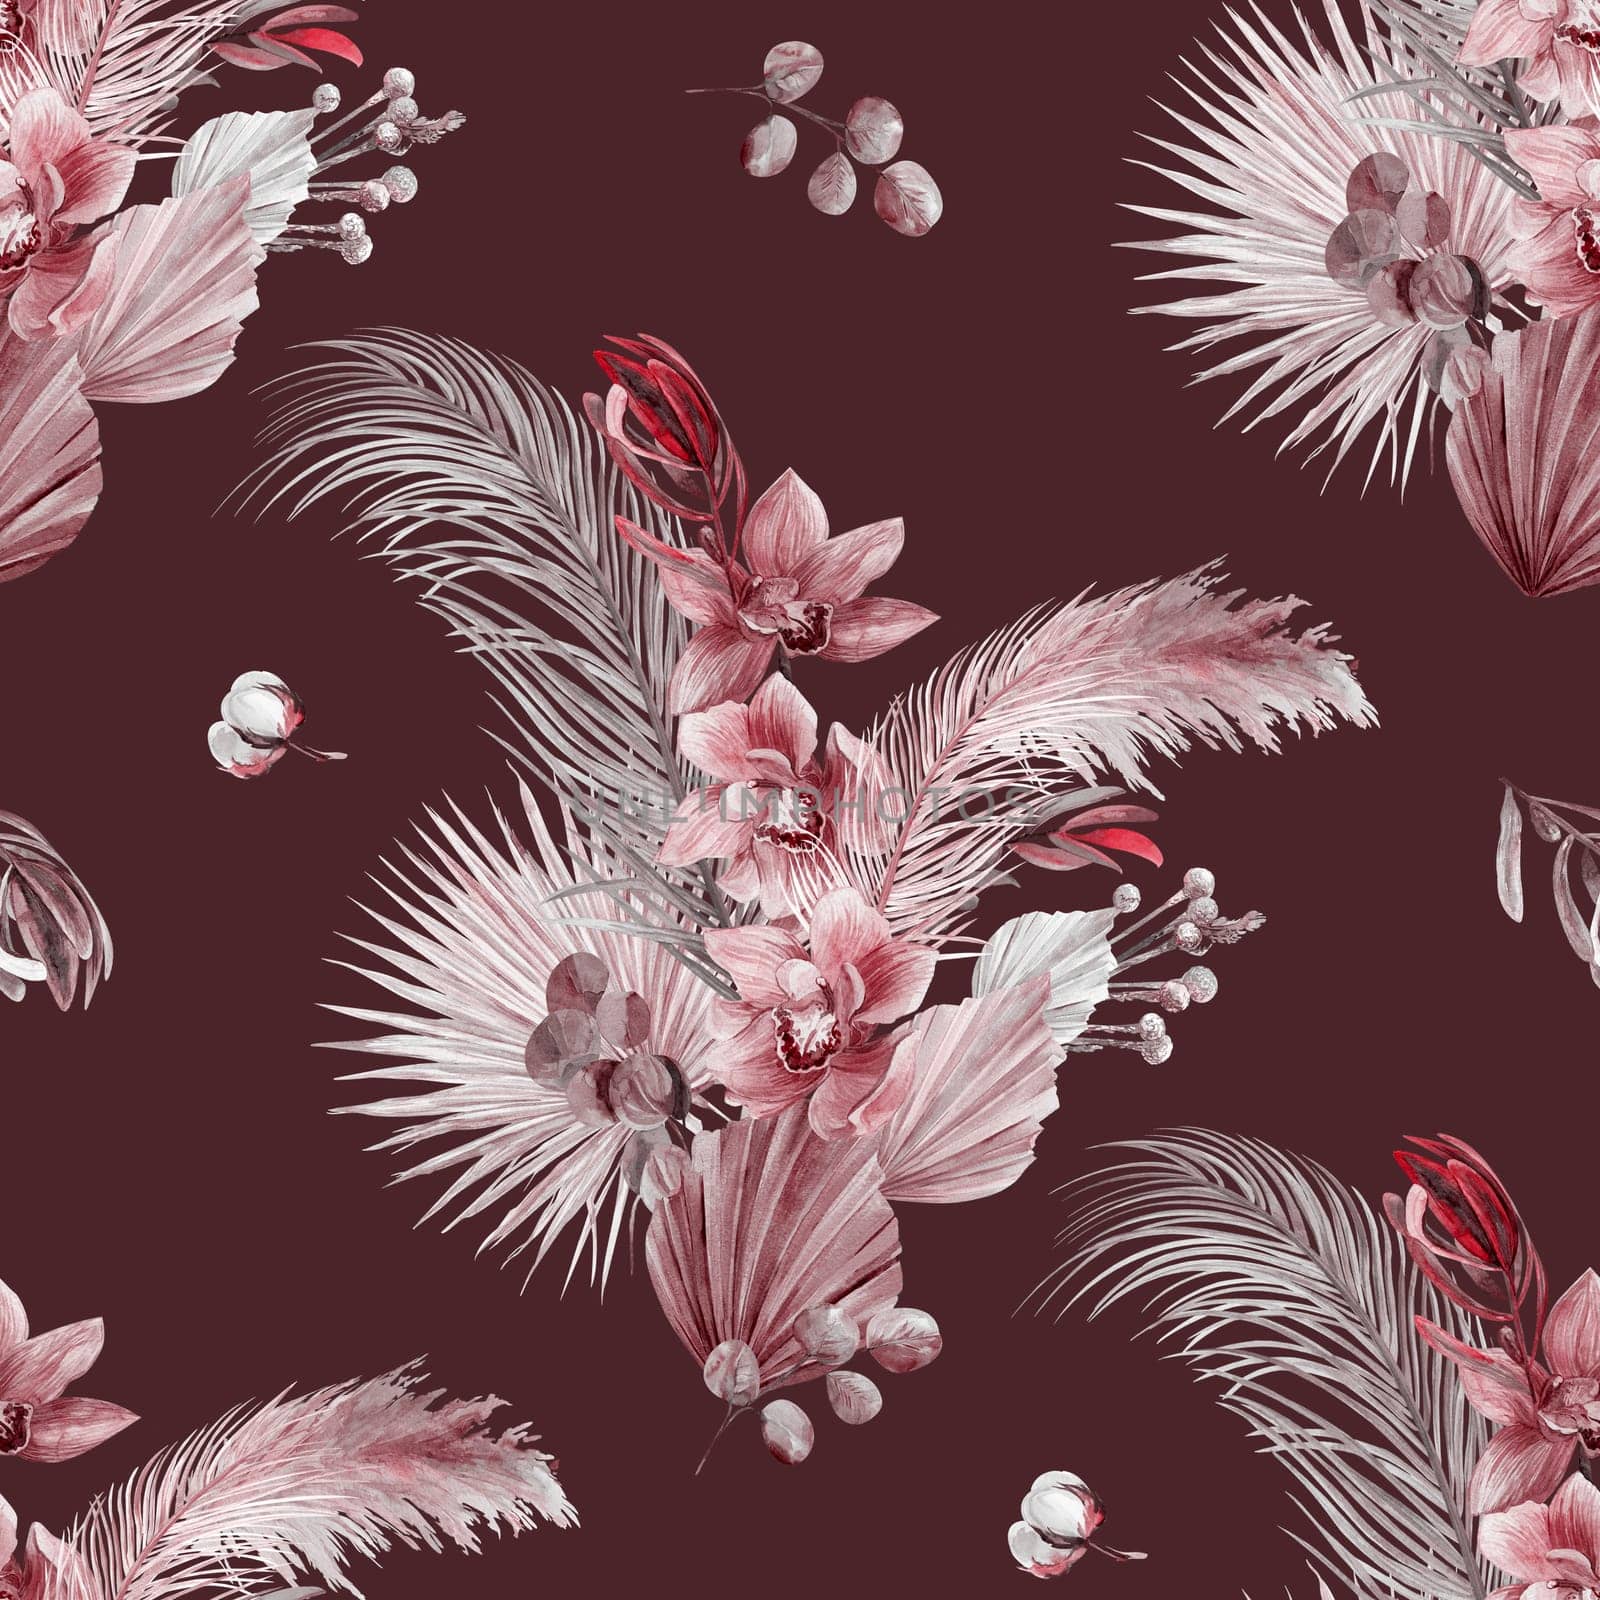 Watercolor seamless monochrome pattern with herbarium of dry palm leaves and orchid flowers on a dark burgundy background